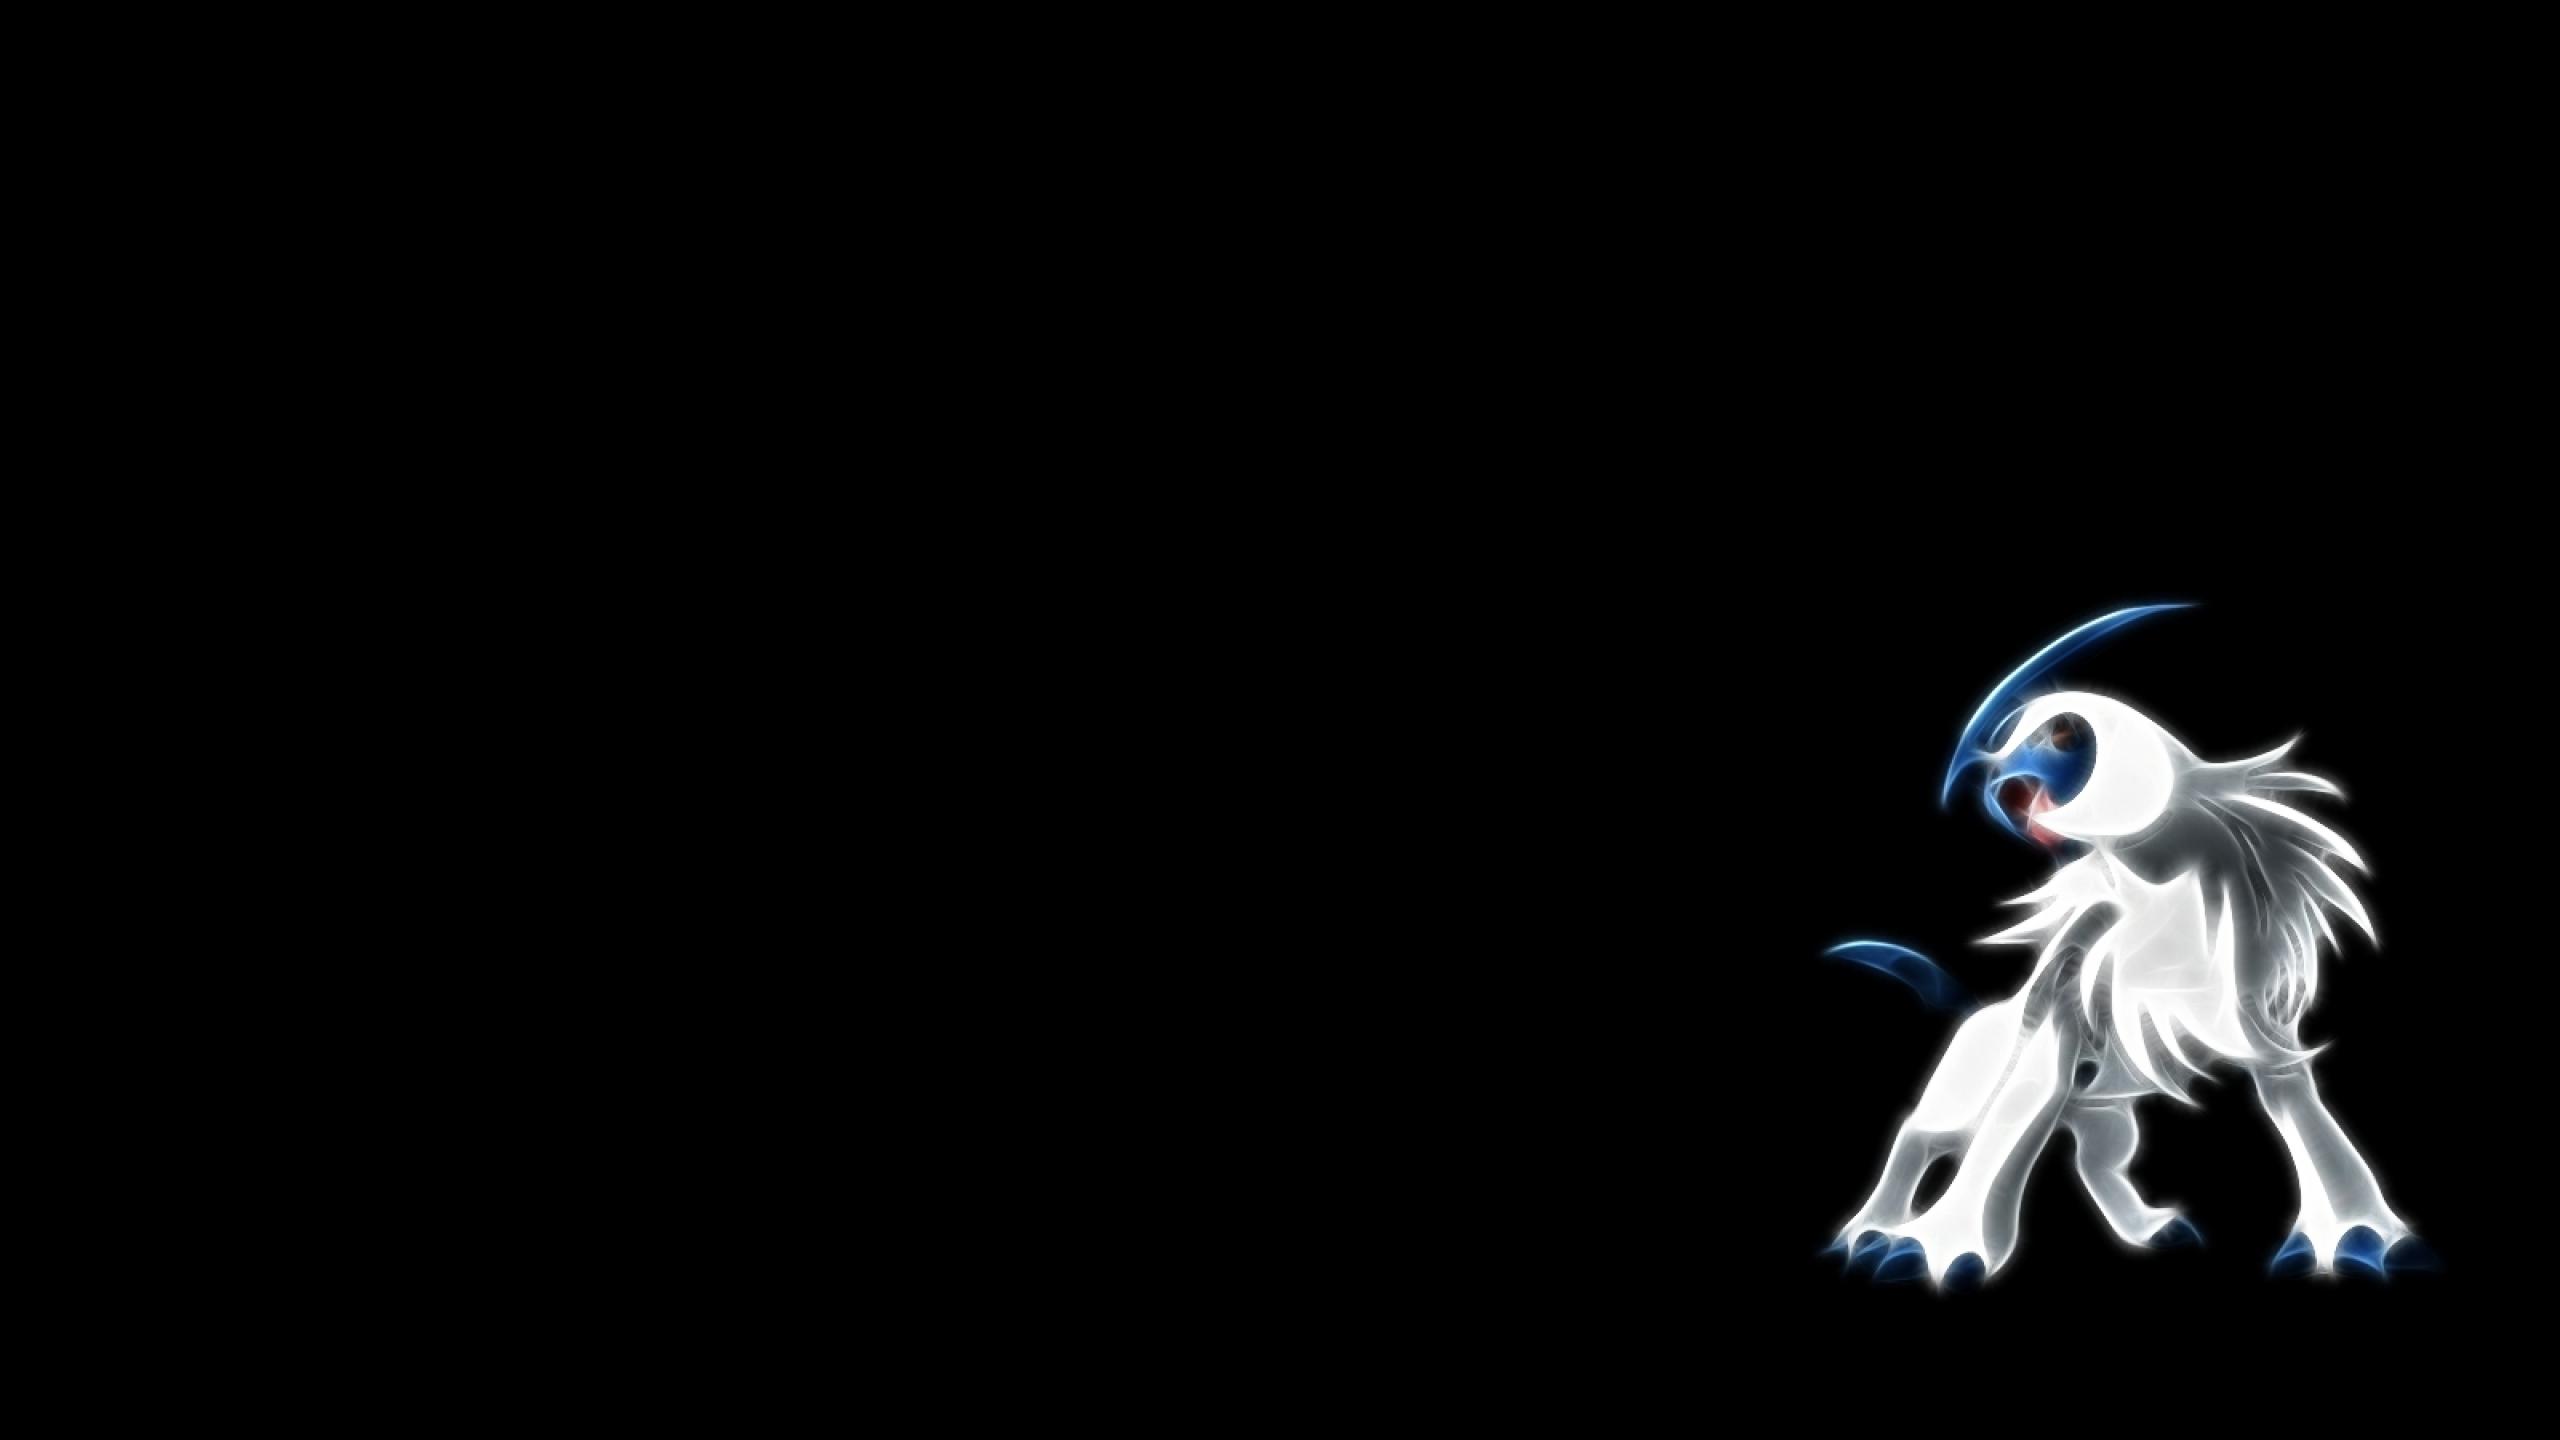 Wallpaper.wiki Free Download Absol Background PIC WPD004007